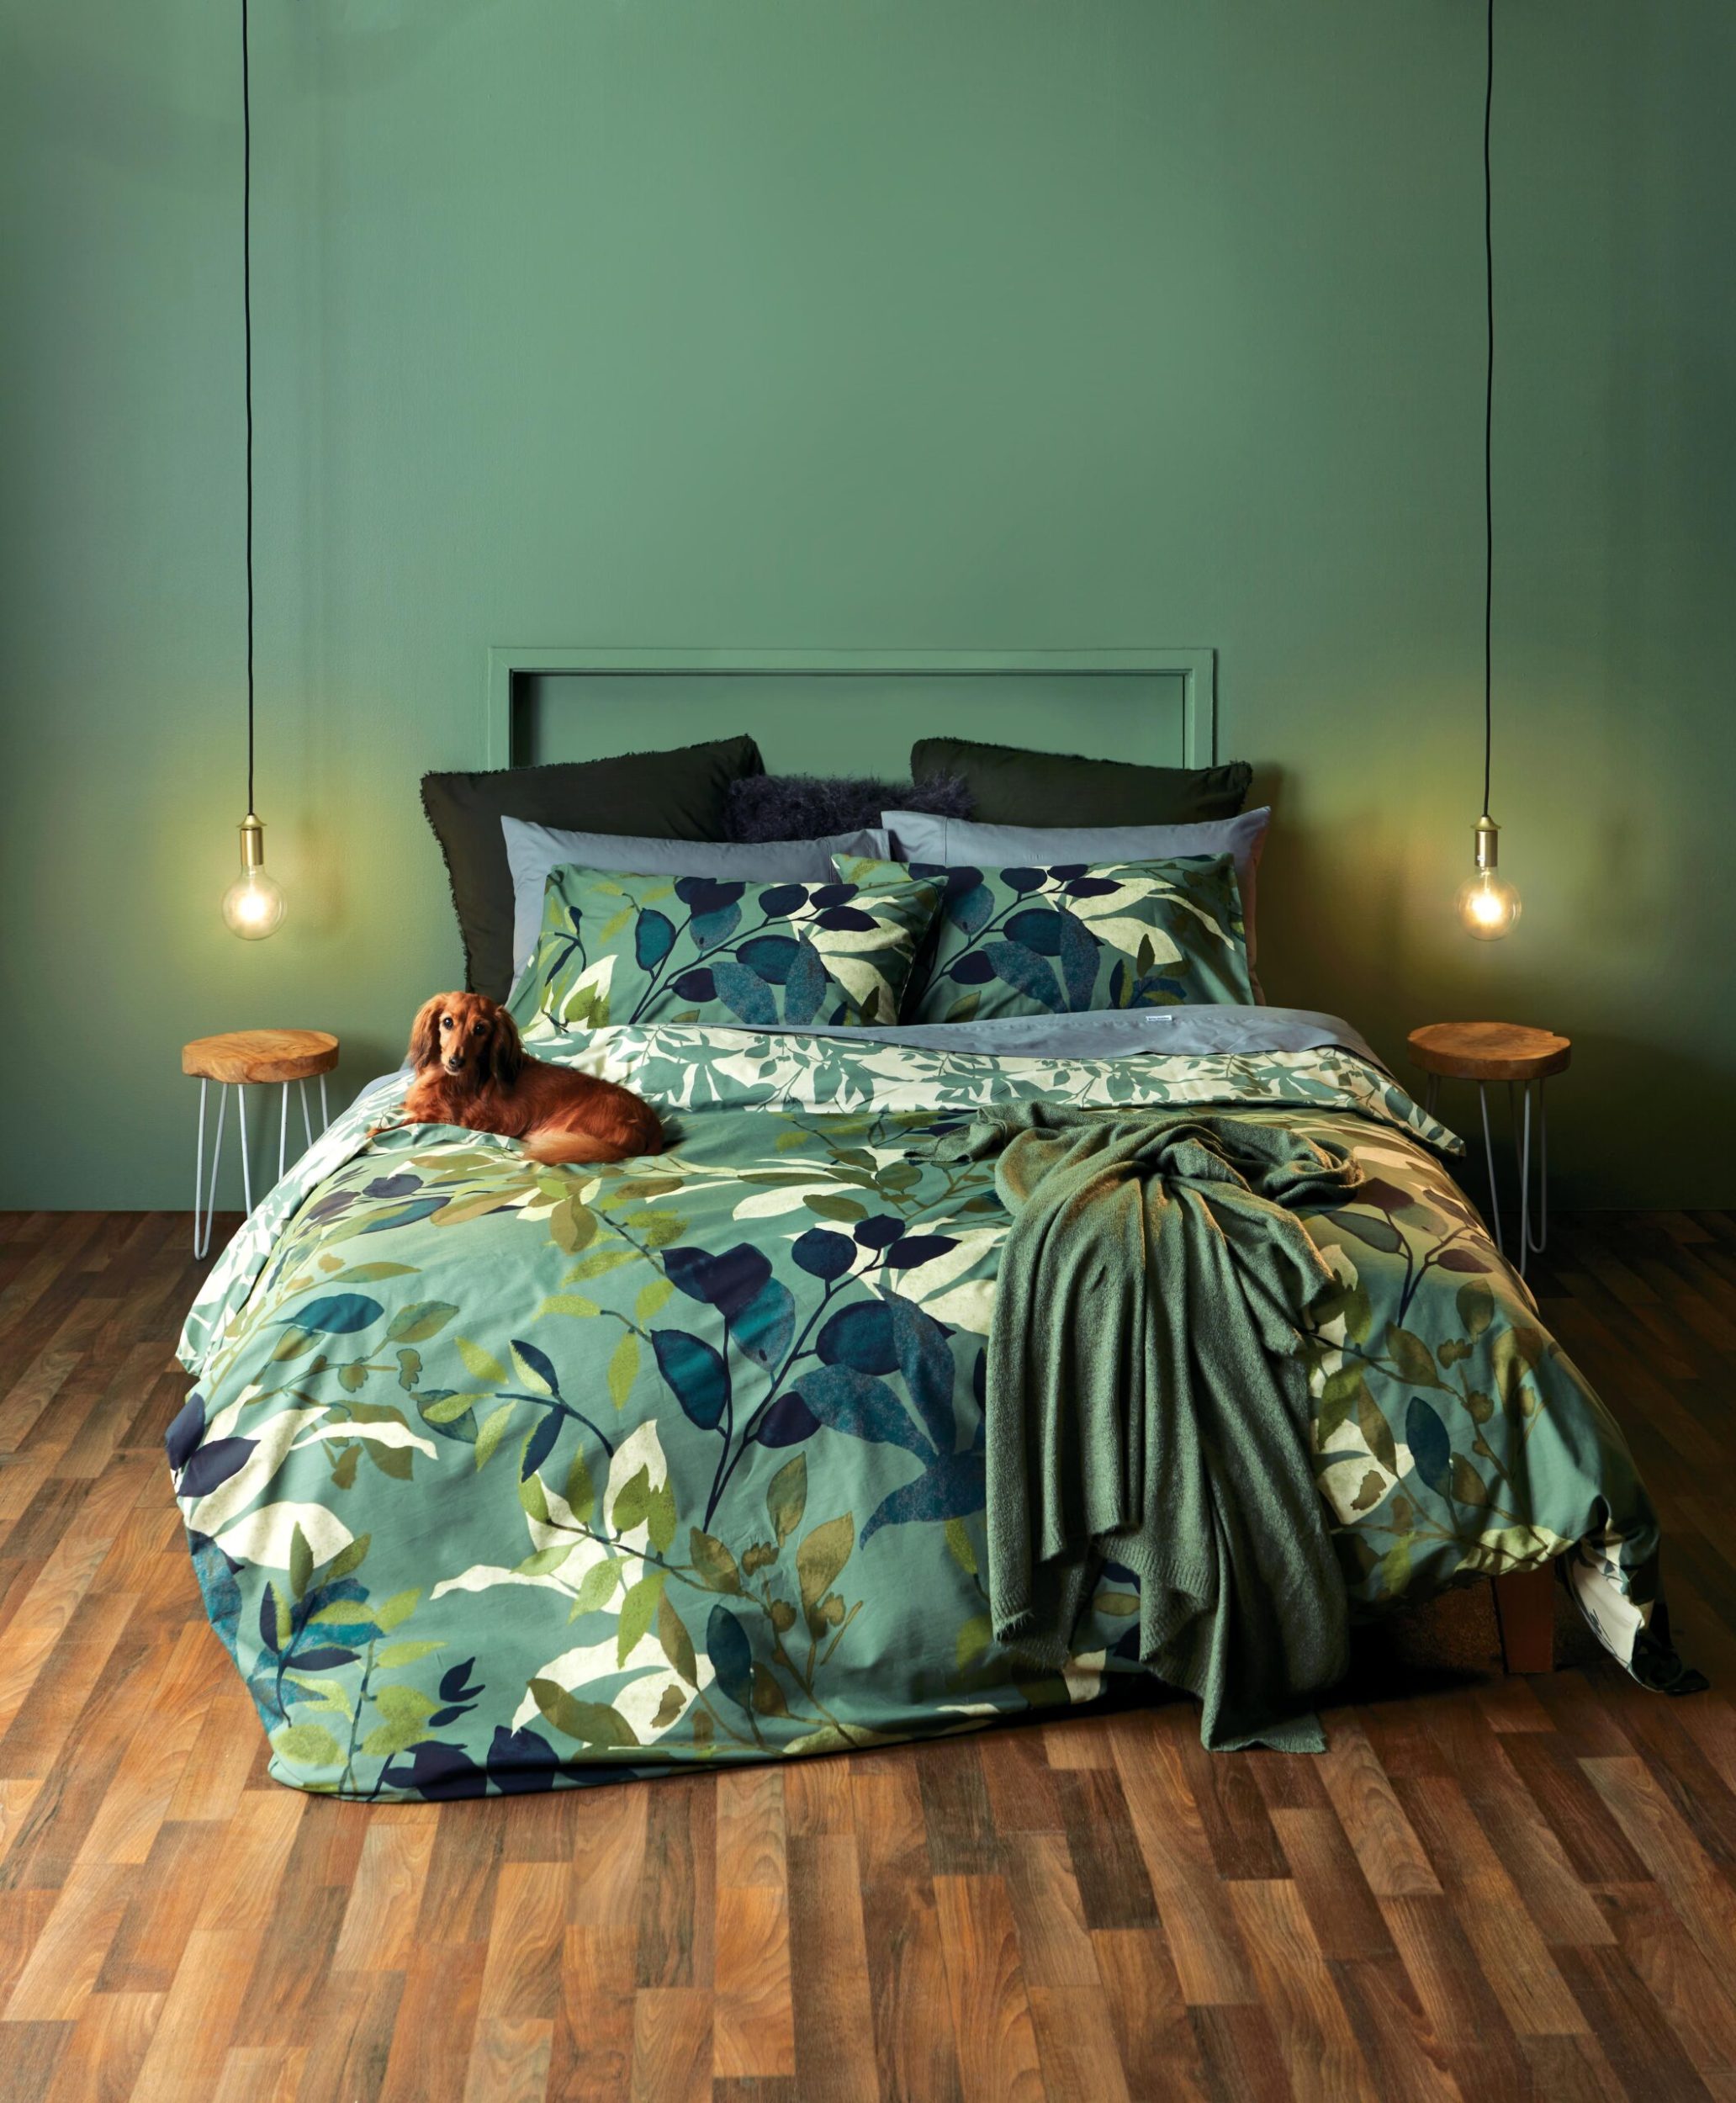 Kas Felix Duvet Cover Sets, from $129.99 from Briscoes